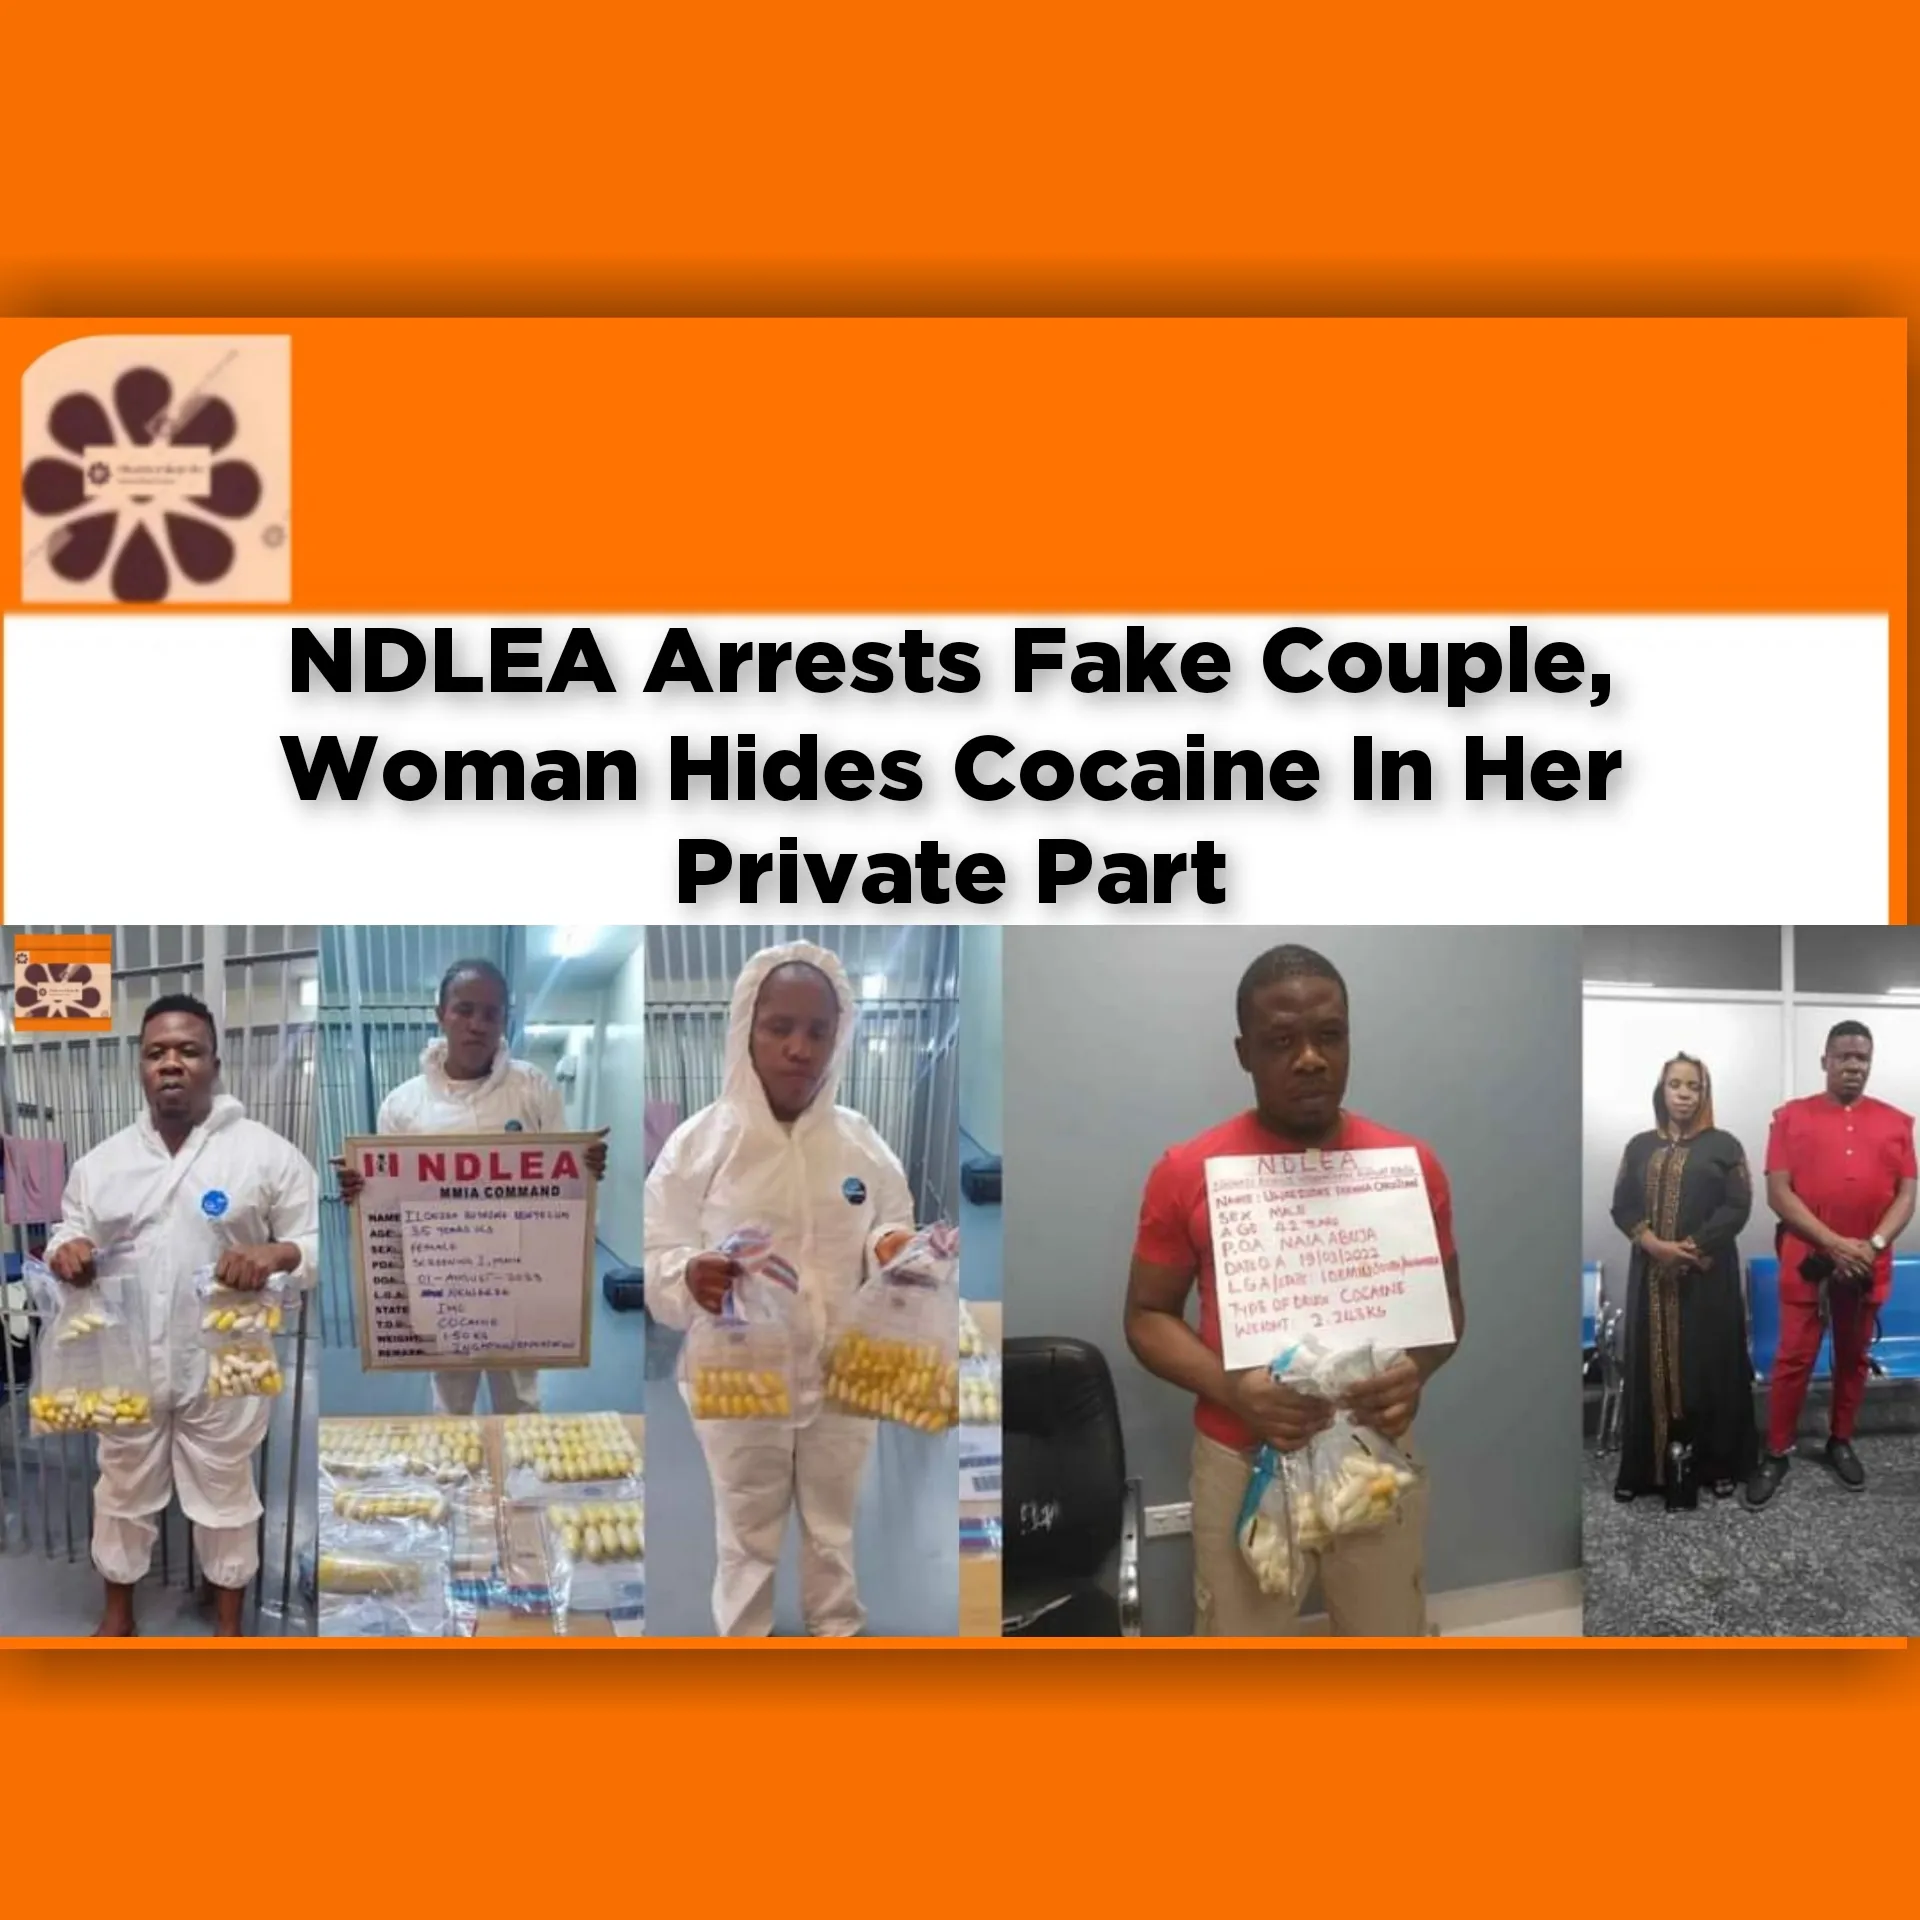 NDLEA Arrests Fake Couple, Woman Hides Cocaine In Her Private Part ~ OsazuwaAkonedo #Aba #Abia #Abuja #Anambra #Cocaine #Couple #India #Lagos #NDLEA #PrivatePart